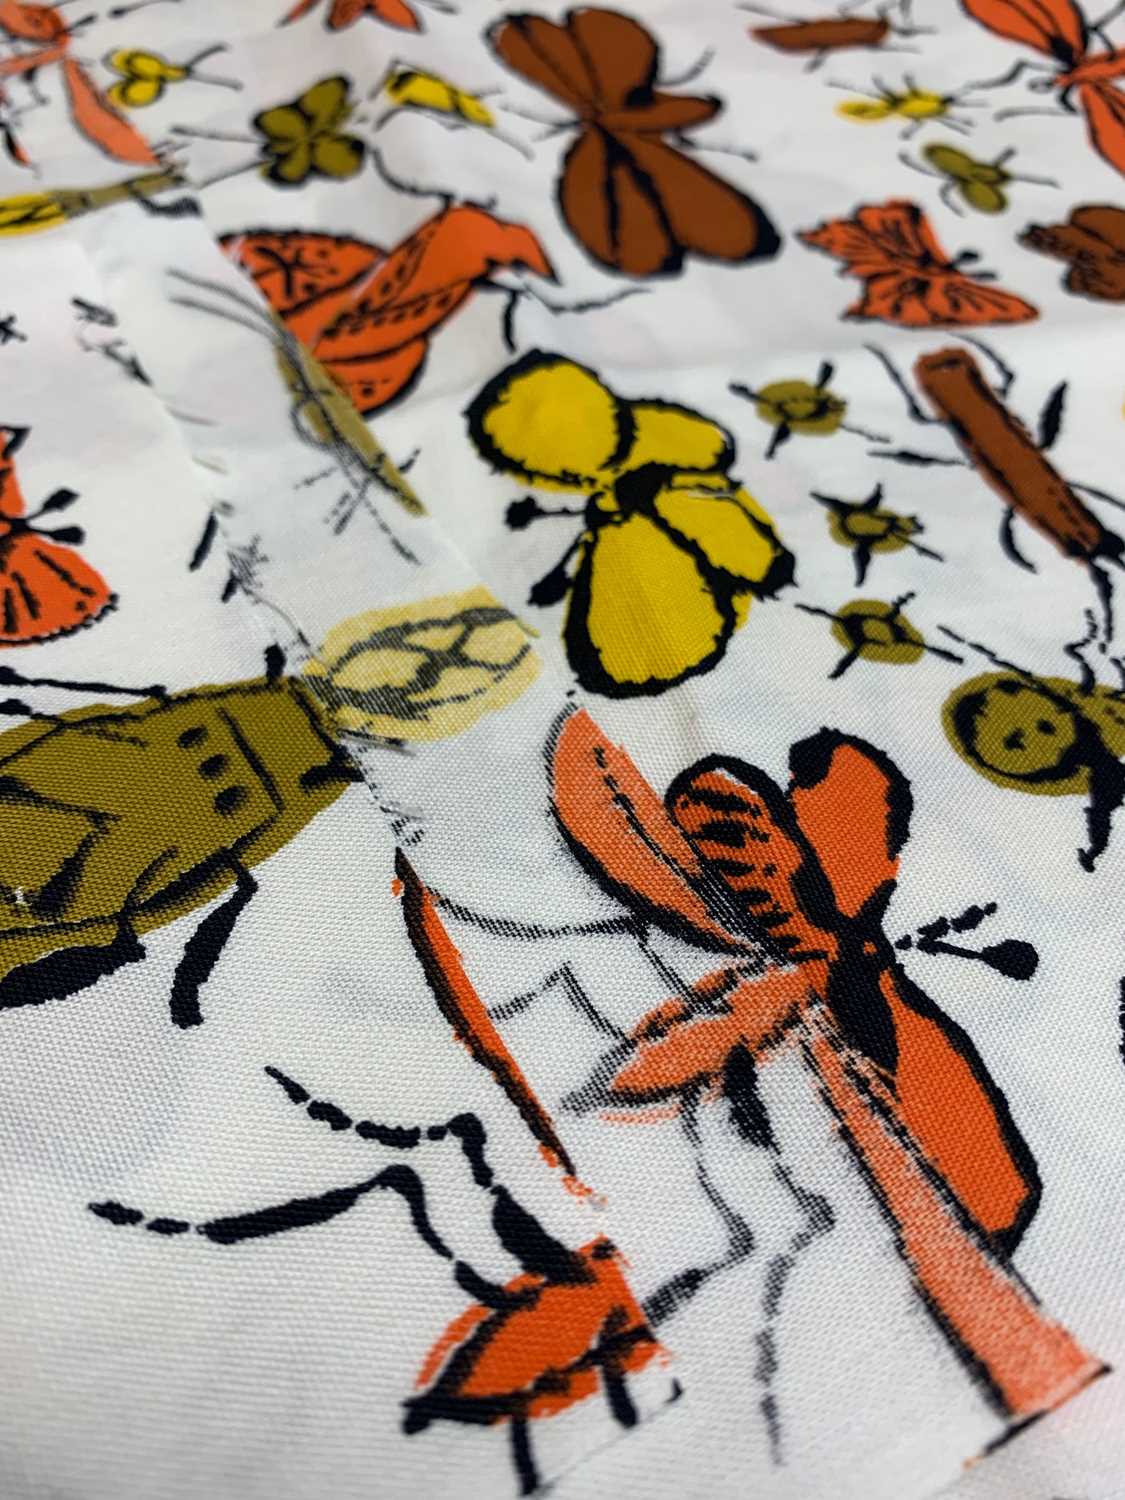 ANDY WARHOL (American 1928-1987) designed screen-print cotton textile, 'Happy Bug Day', orange - Image 4 of 6